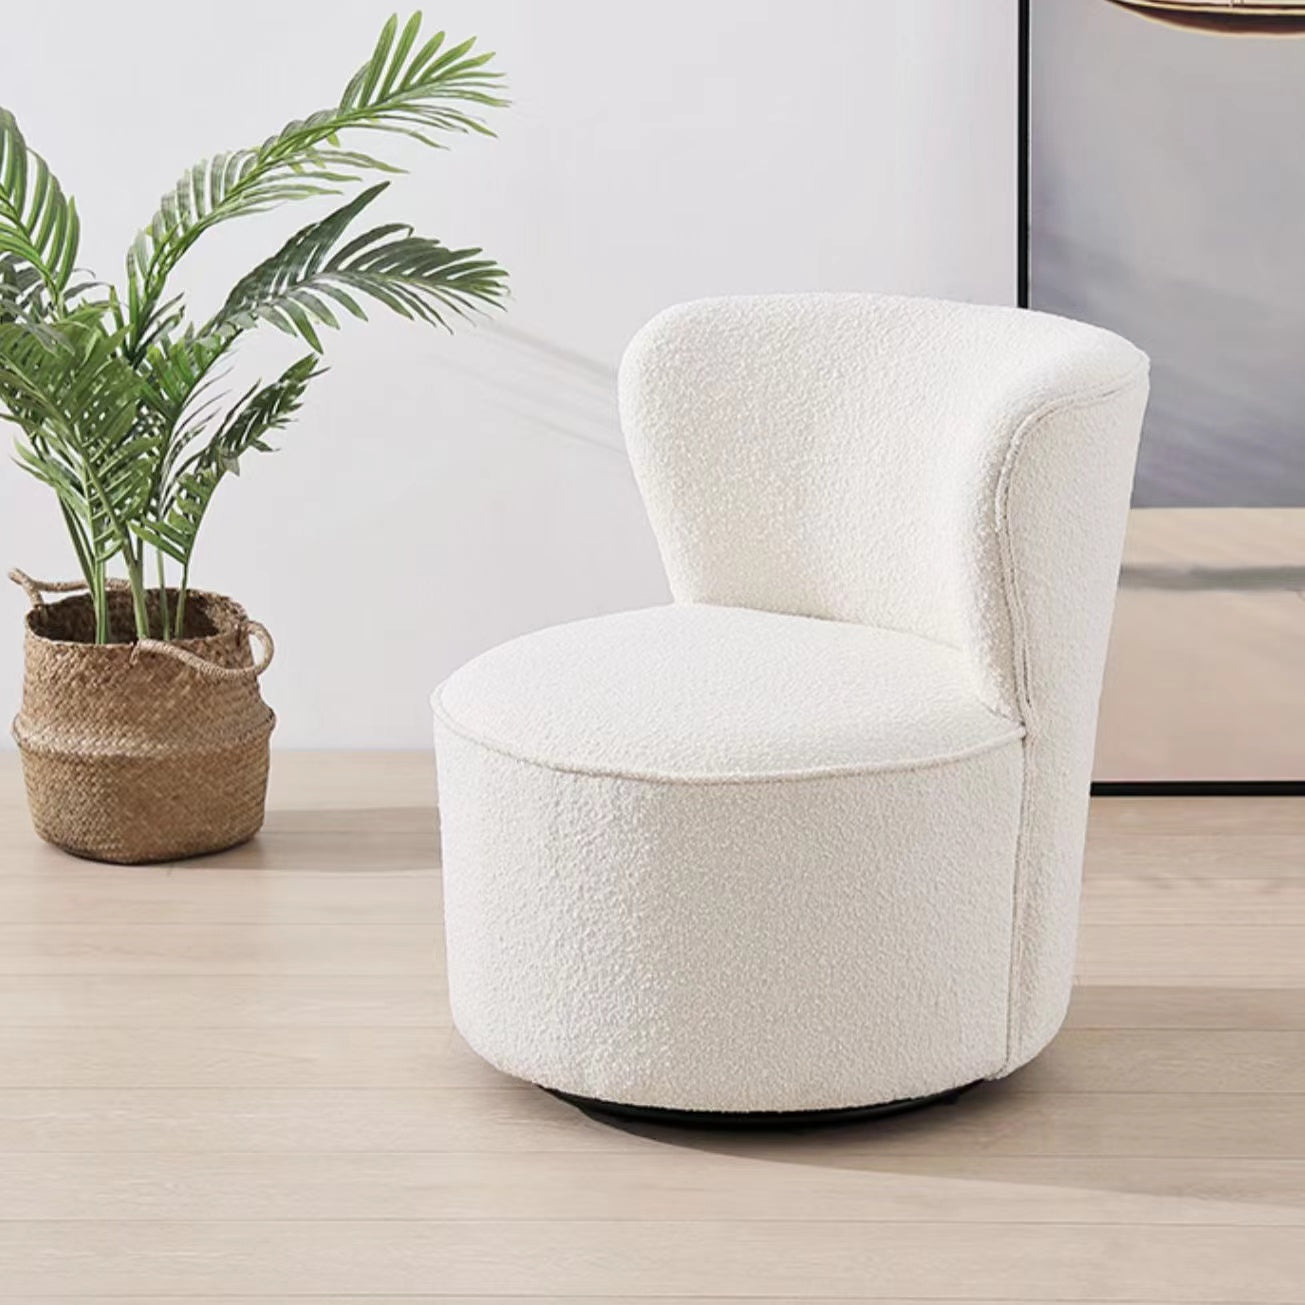 Stylish Nordic White Boucle Sherpa Swivel Accent Chair with High Back for Modern Living Room Design